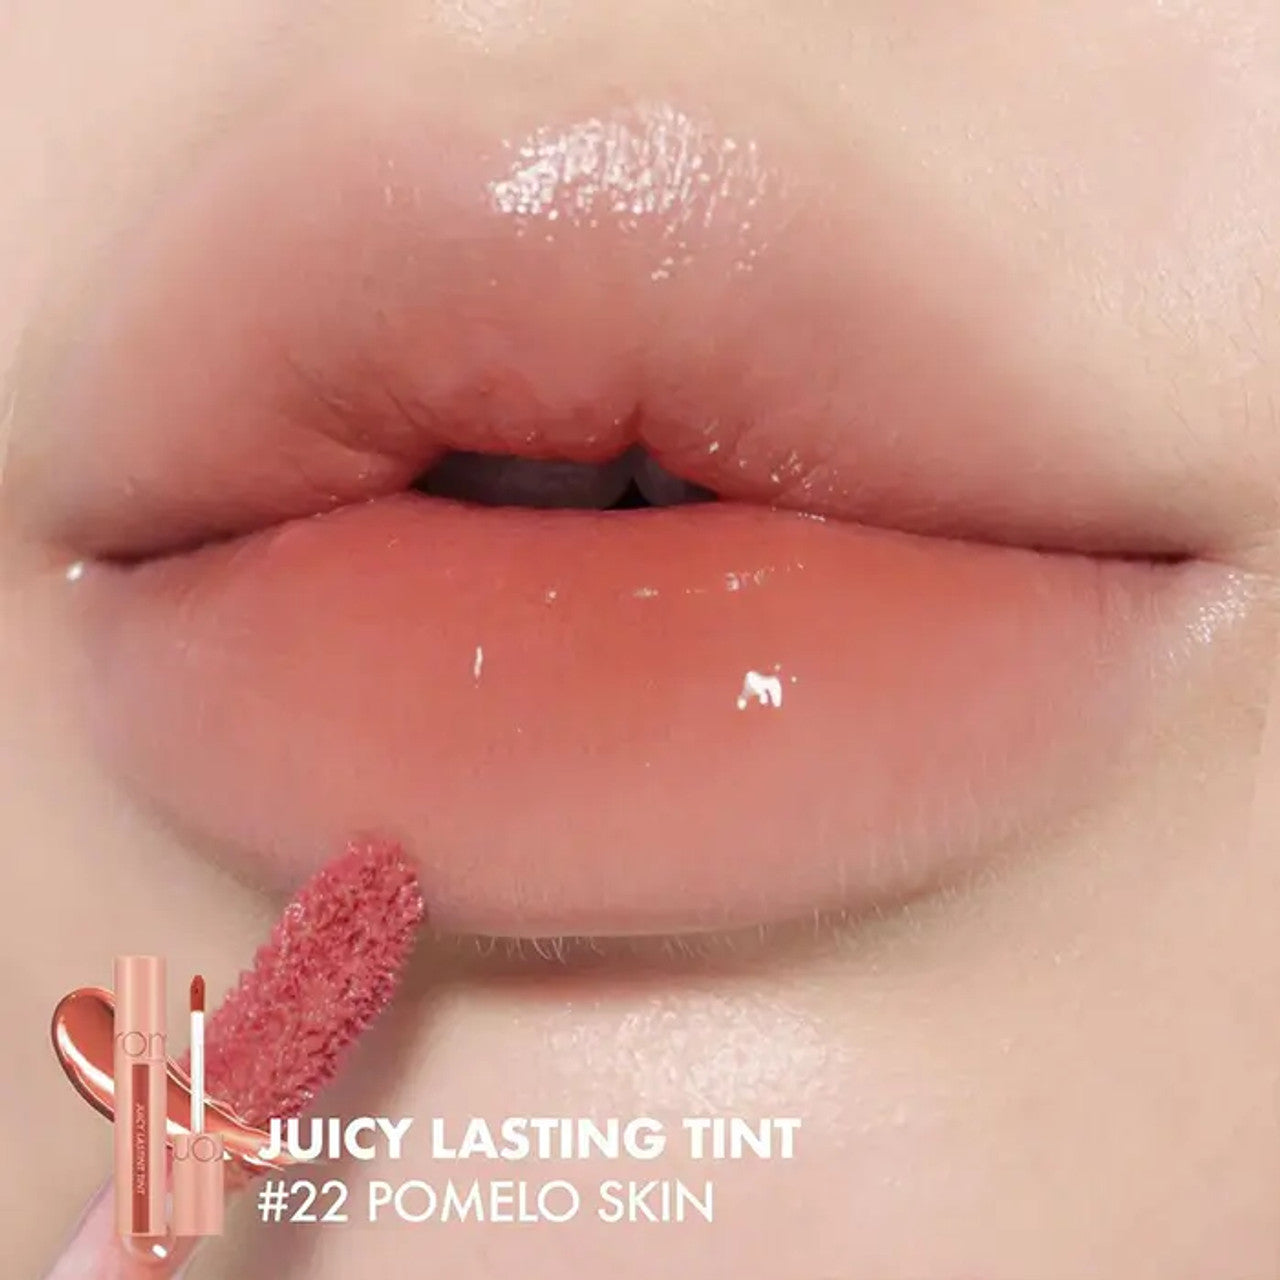 JUICY LASTING TINT 22 POMELO SKIN - ROM&ND